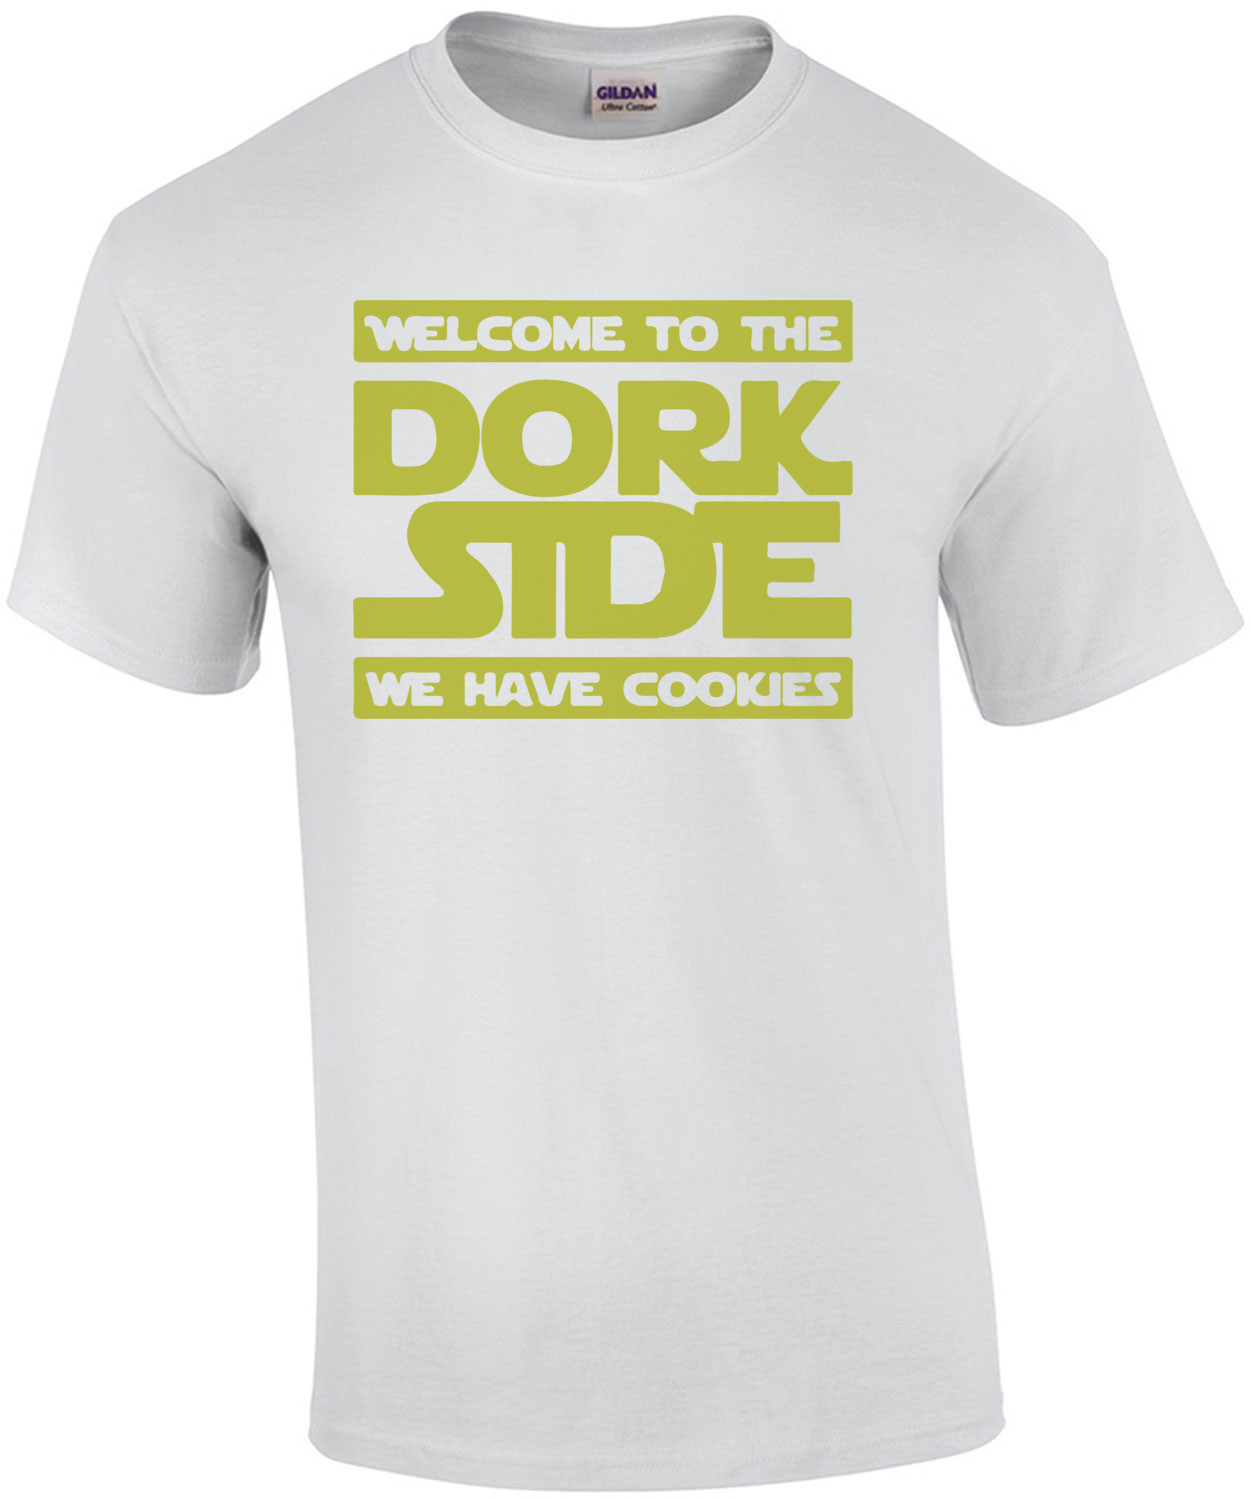 Star Wars Parody - Welcome to the dork side - we have cookies